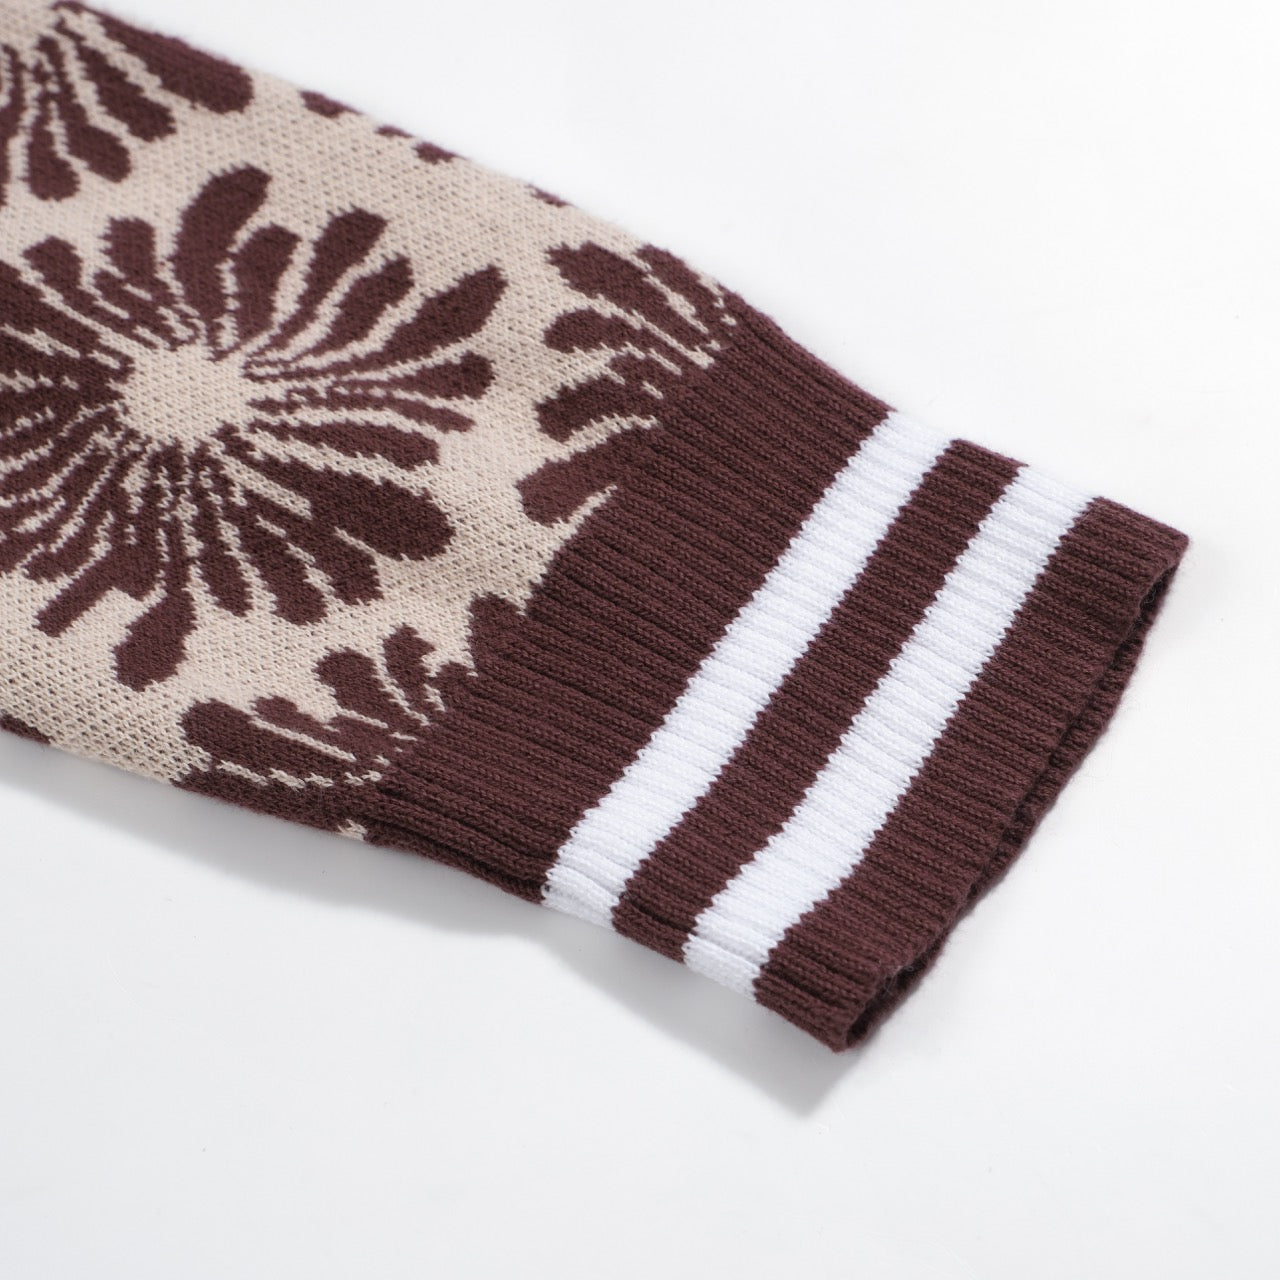 Men's Brown Knitted Long Sleeves Polo With Flowers